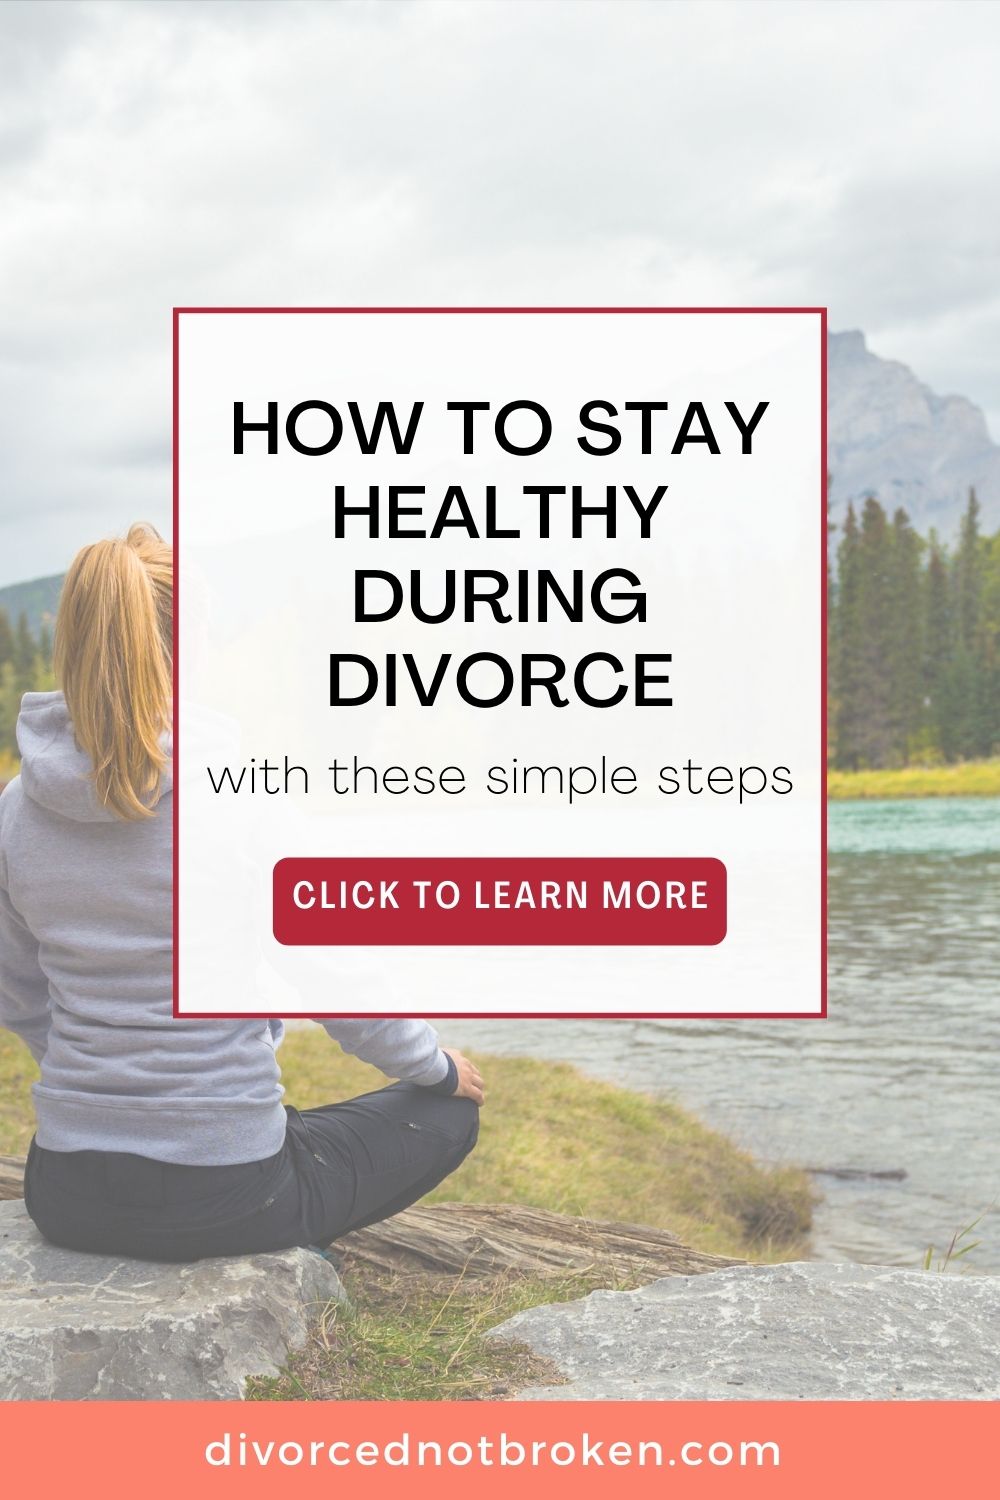 How to Stay Healthy During Divorce title graphic overlay with woman meditating in the background.